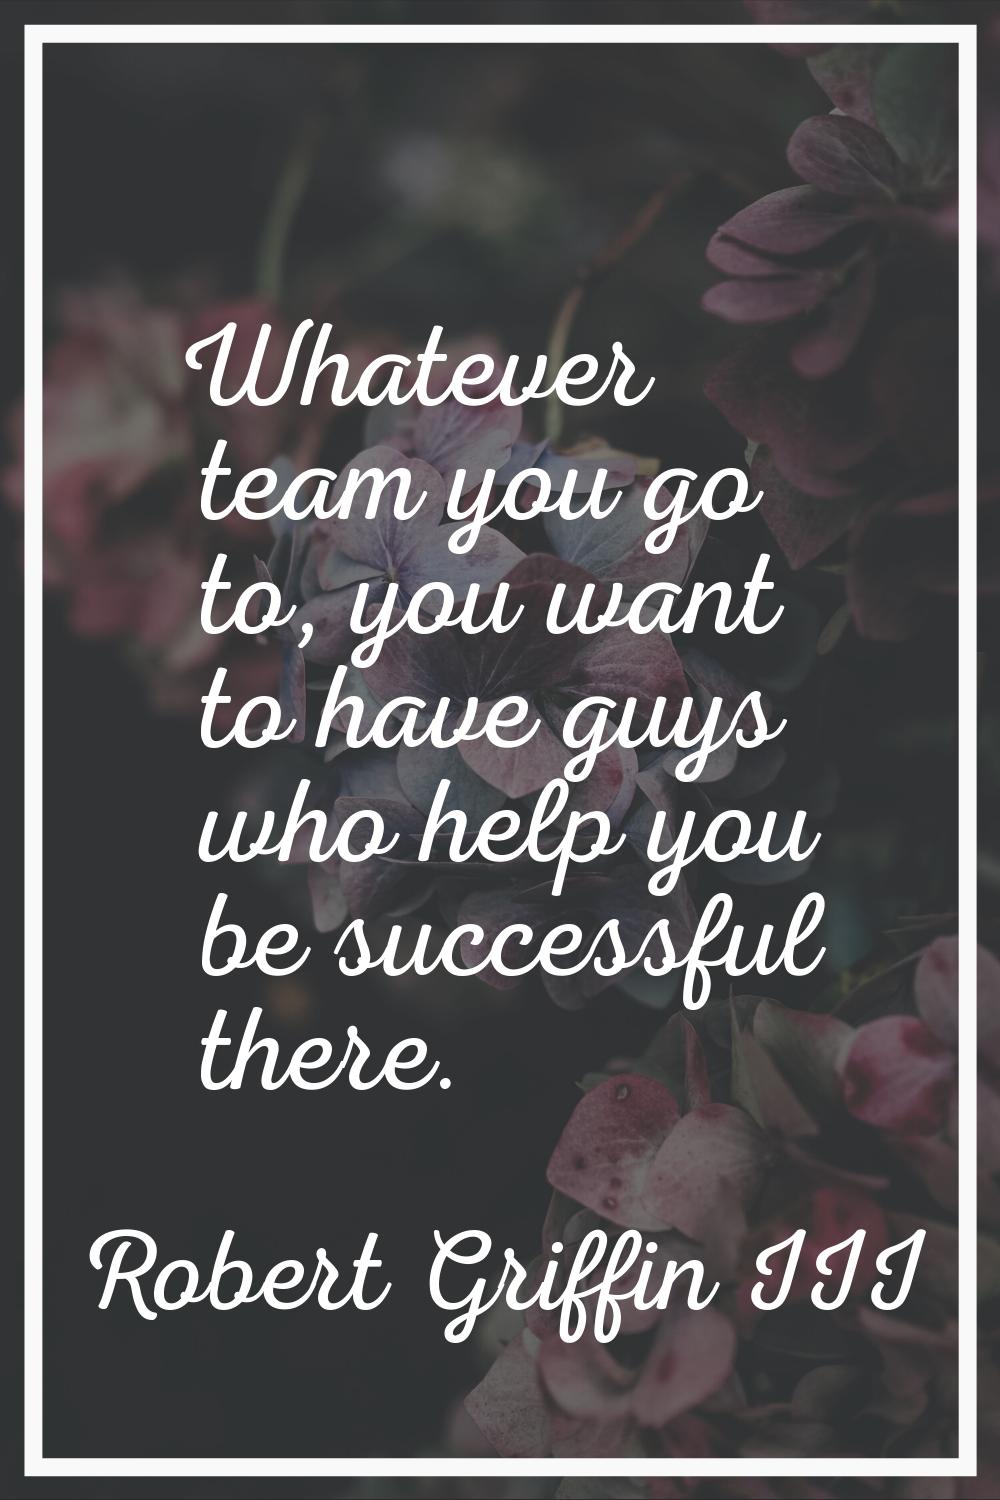 Whatever team you go to, you want to have guys who help you be successful there.